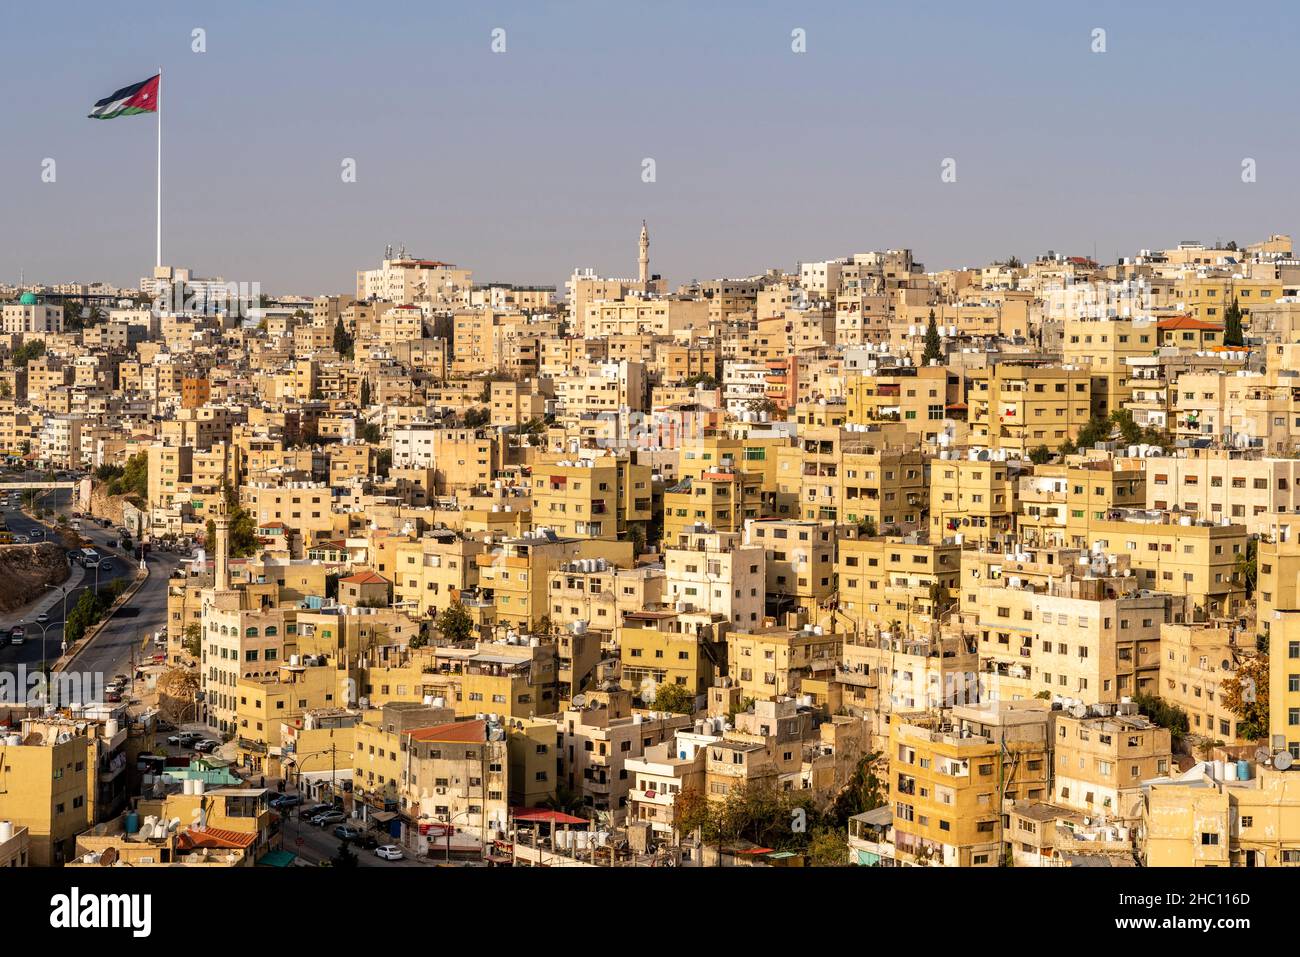 Amman Jordan Weather High Resolution Stock Photography and Images - Alamy